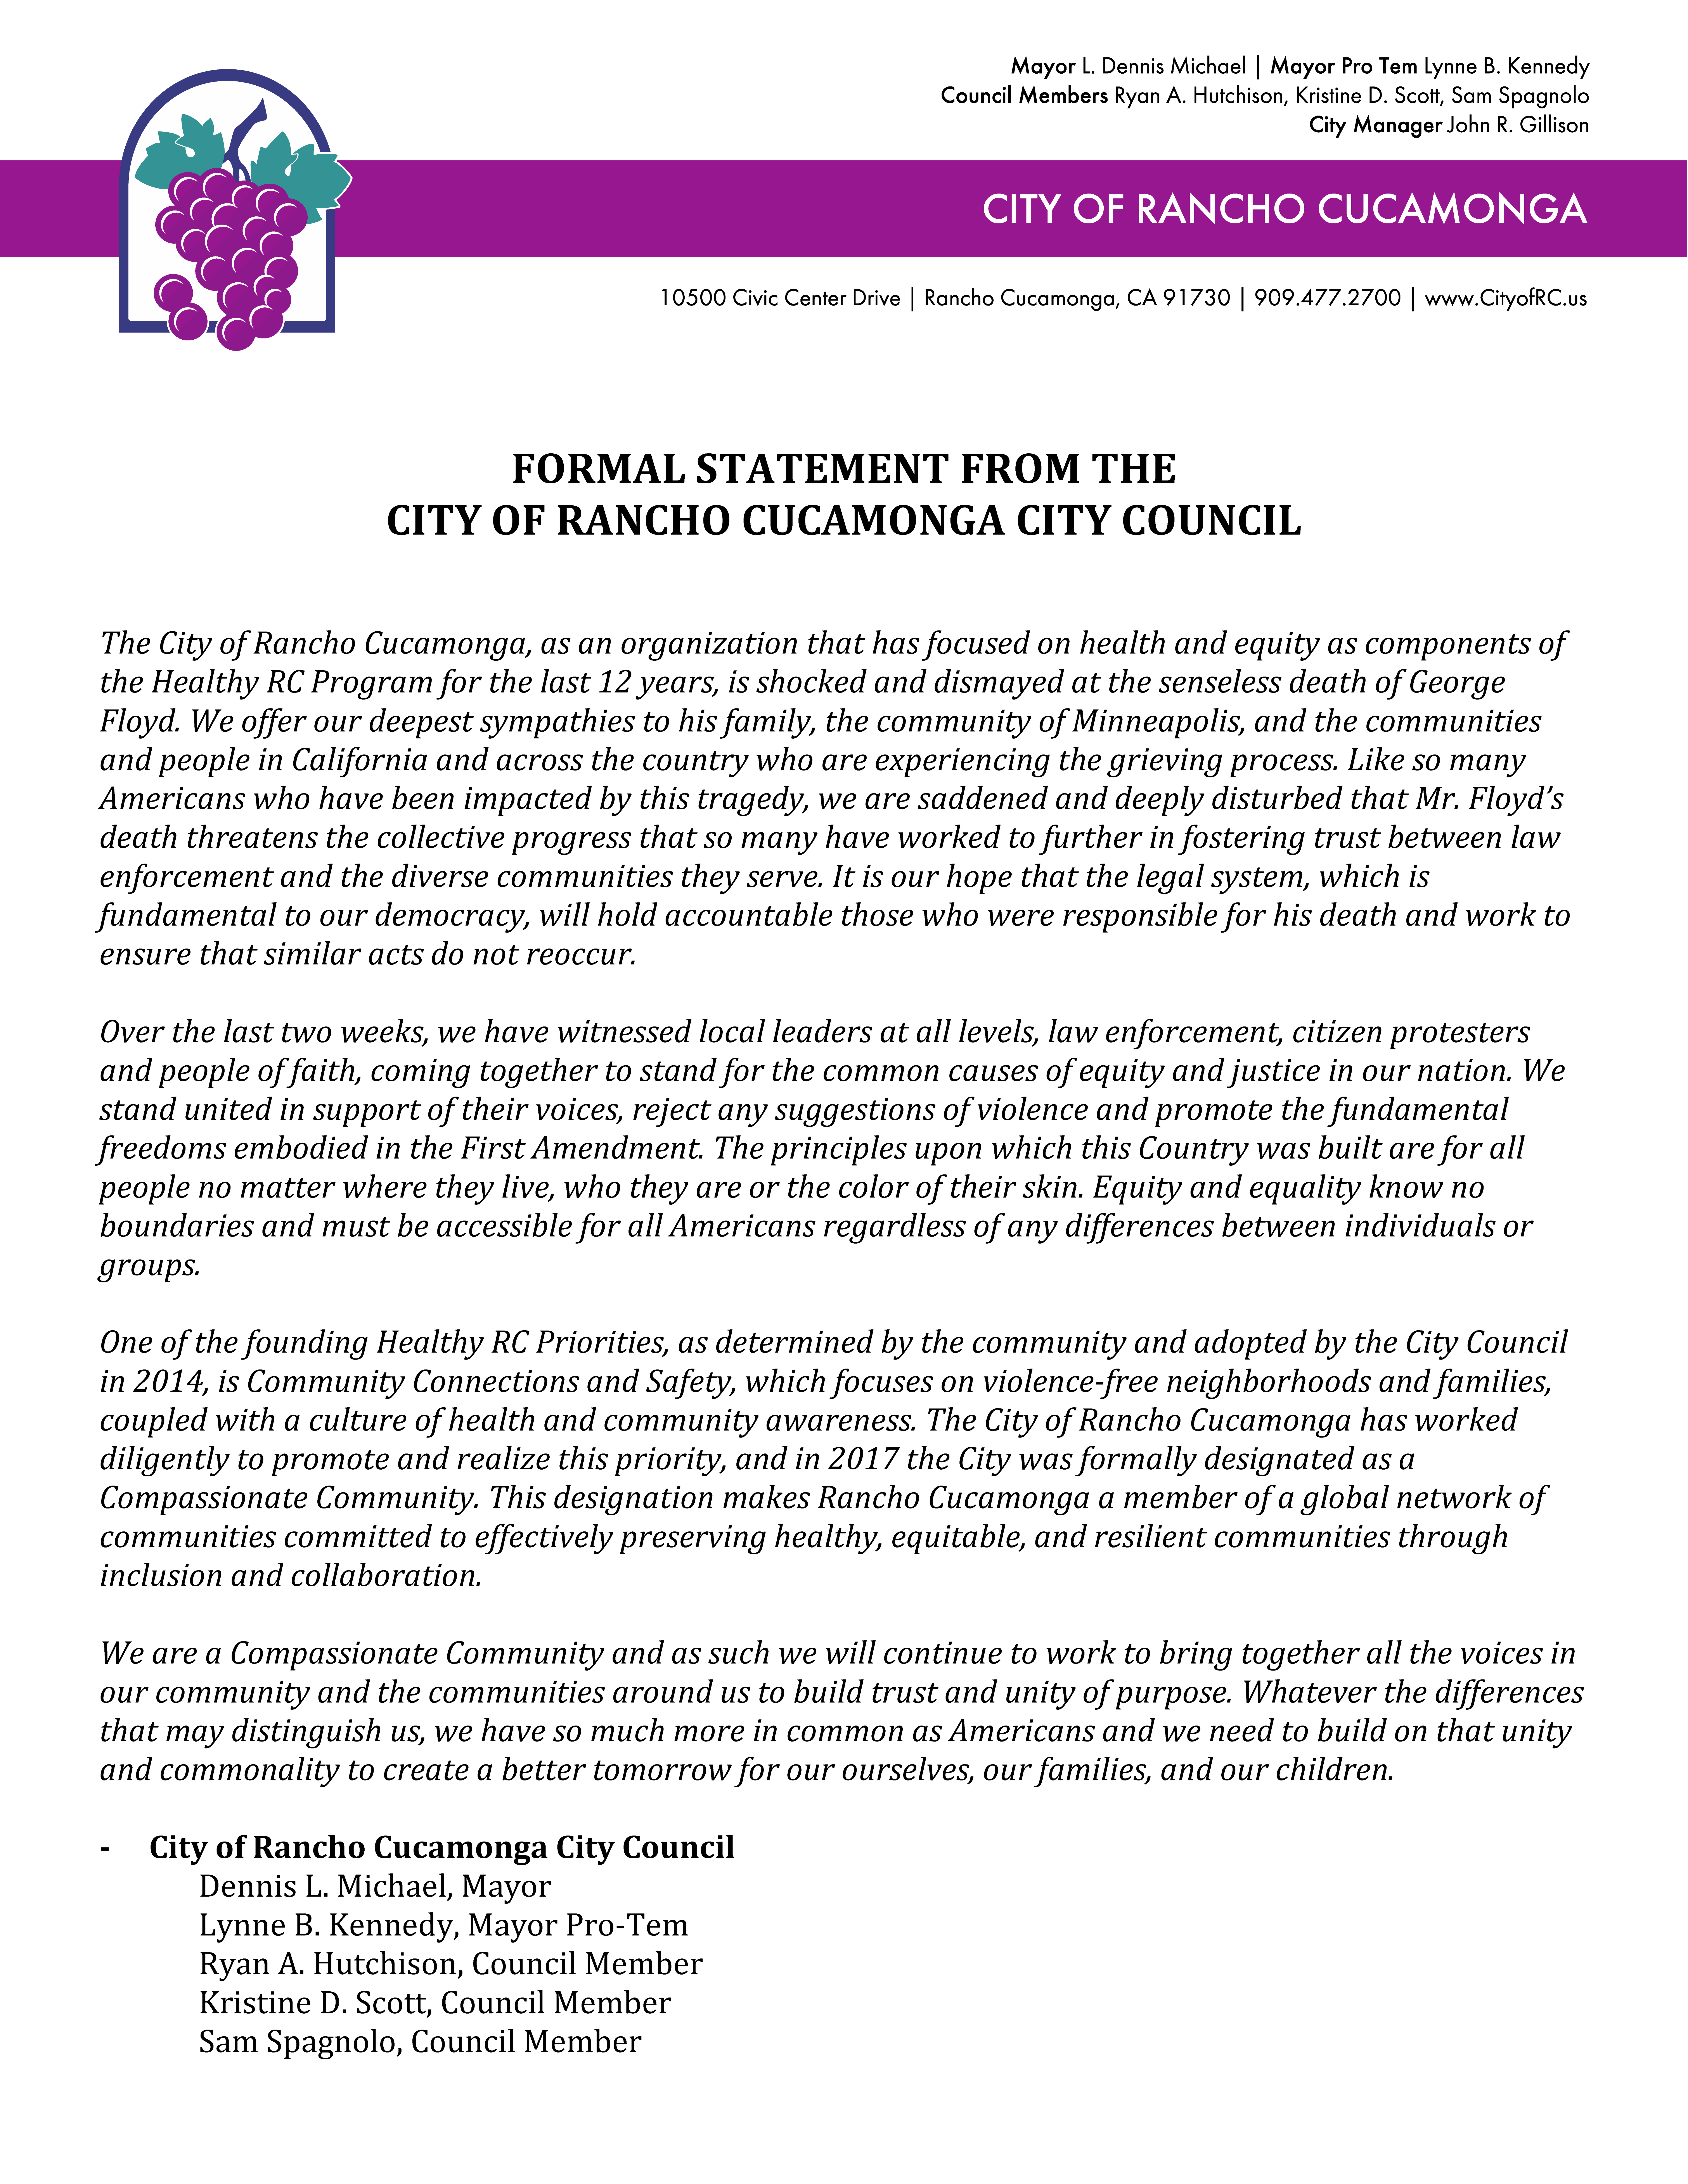 Council Formal Statement 06.09.2020